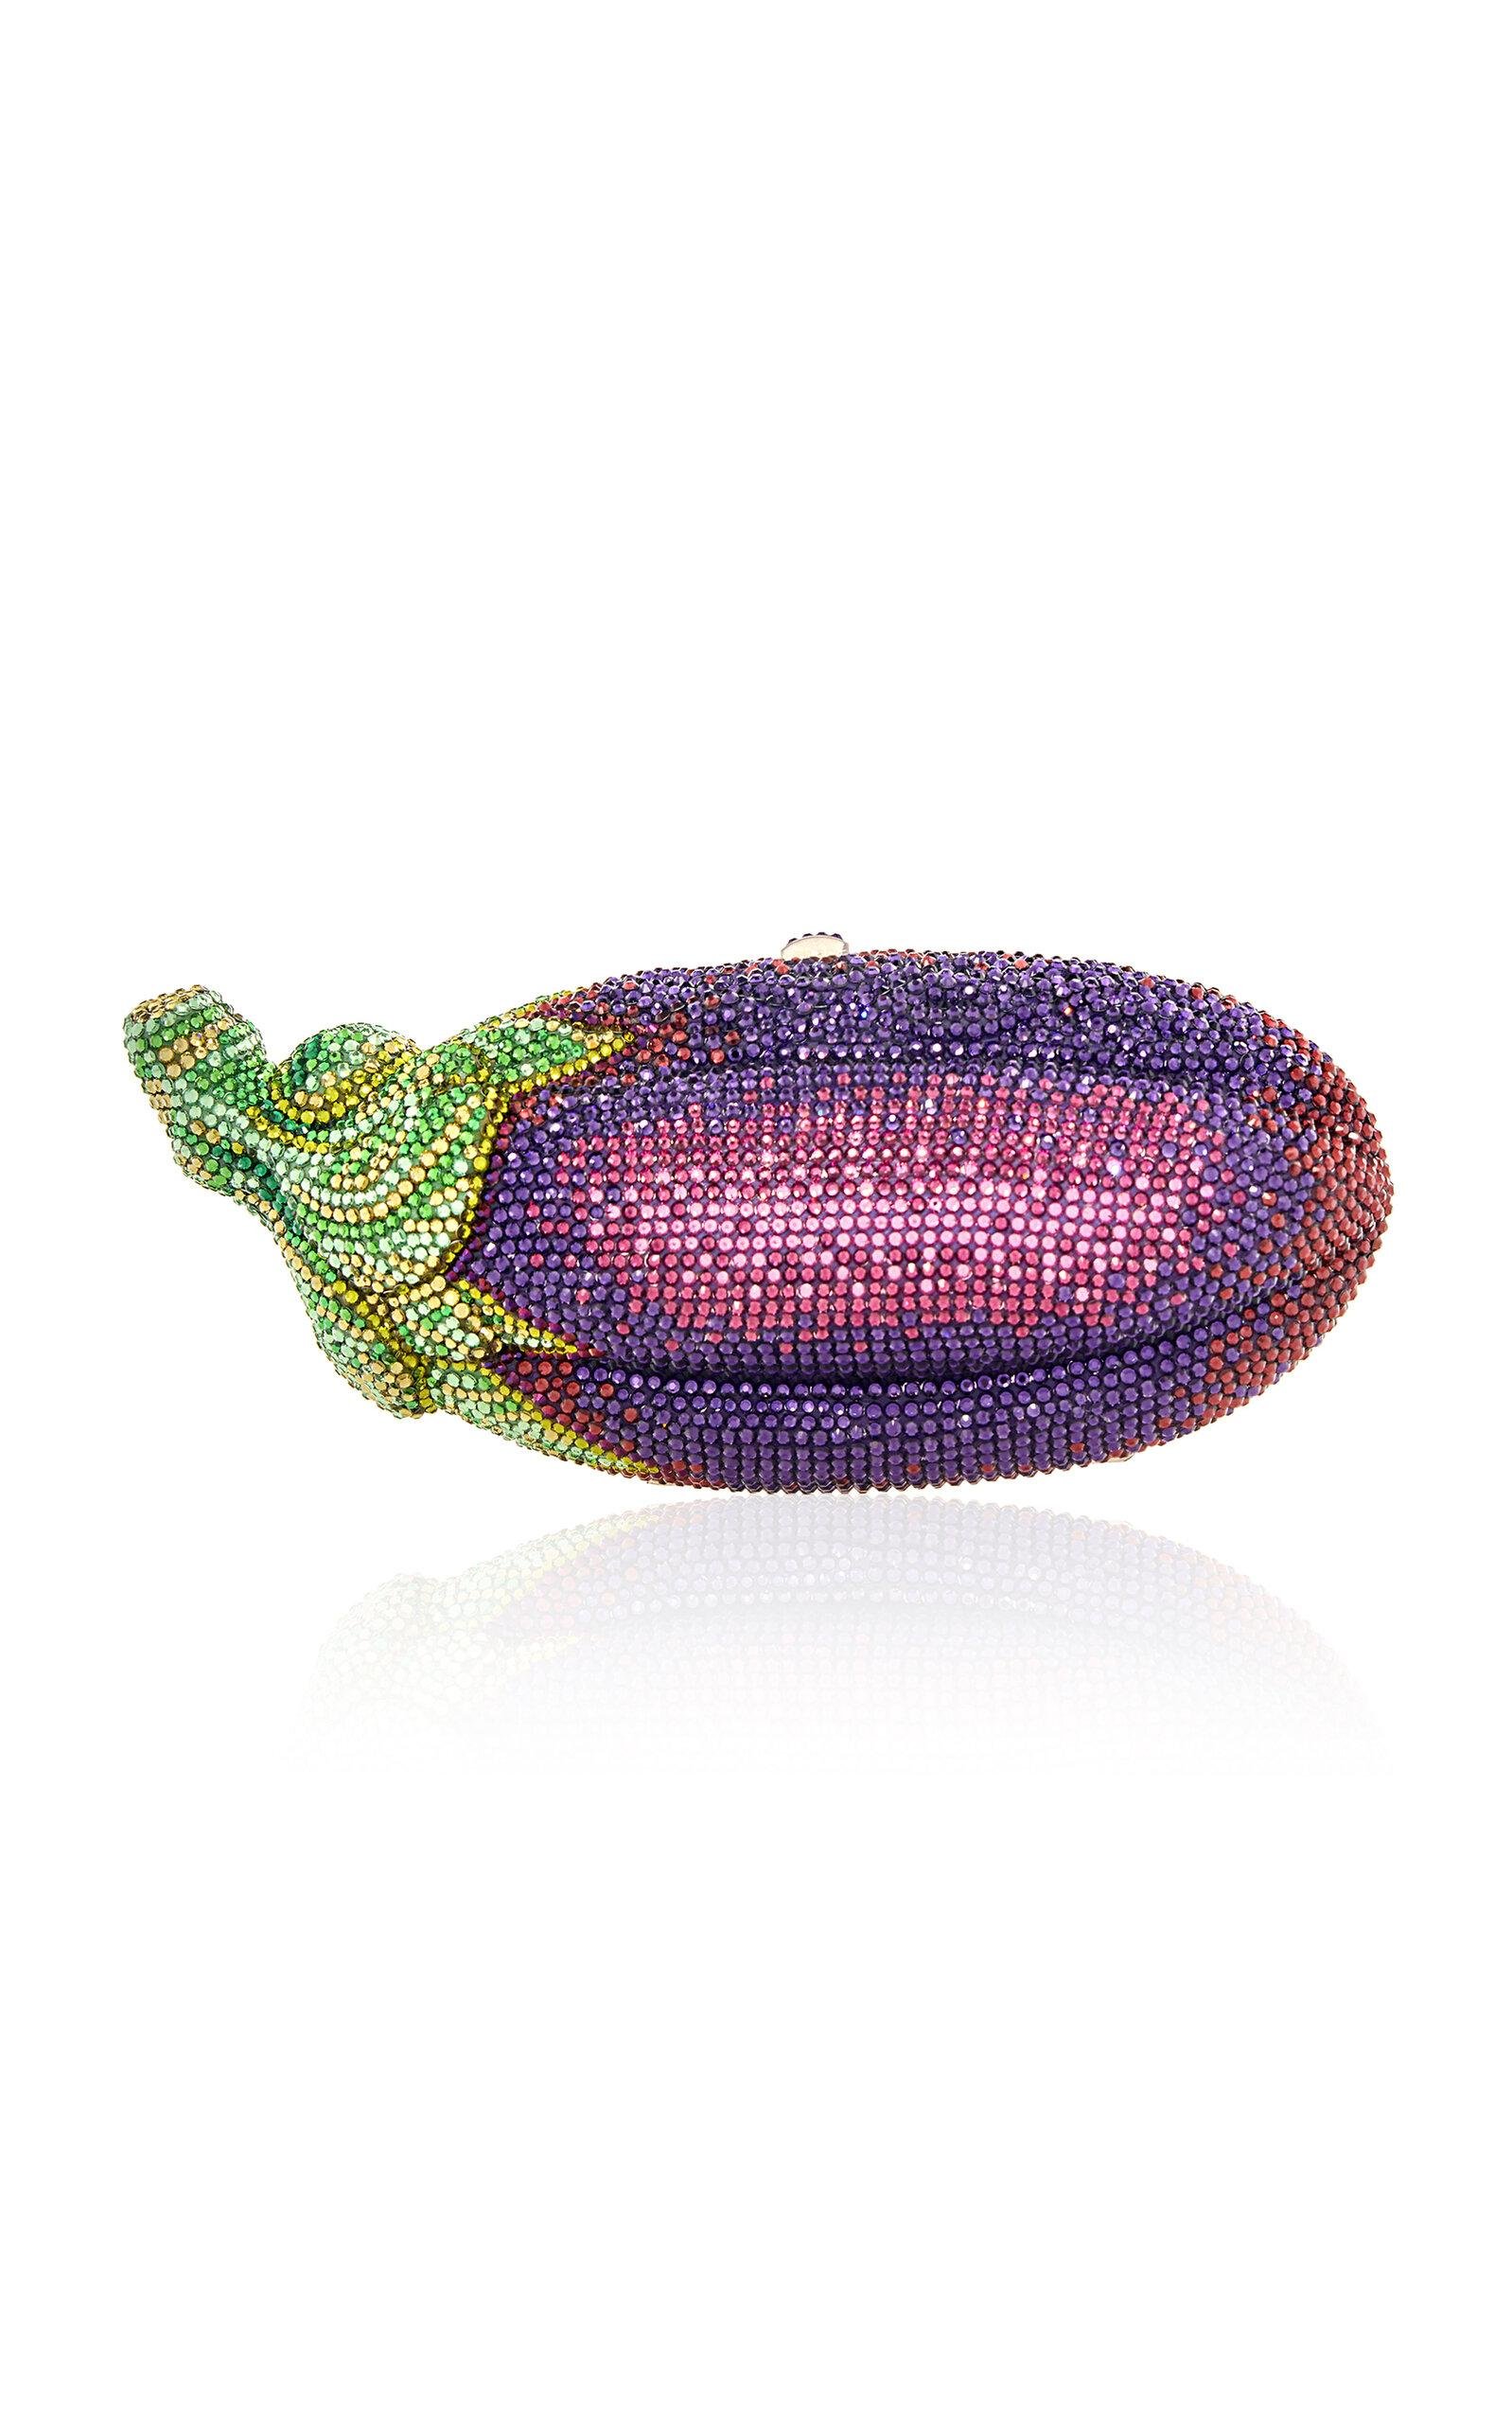 Judith Leiber Couture - Eggplant Crystal Clutch - Purple - OS - Only At Moda Operandi by JUDITH LEIBER COUTURE